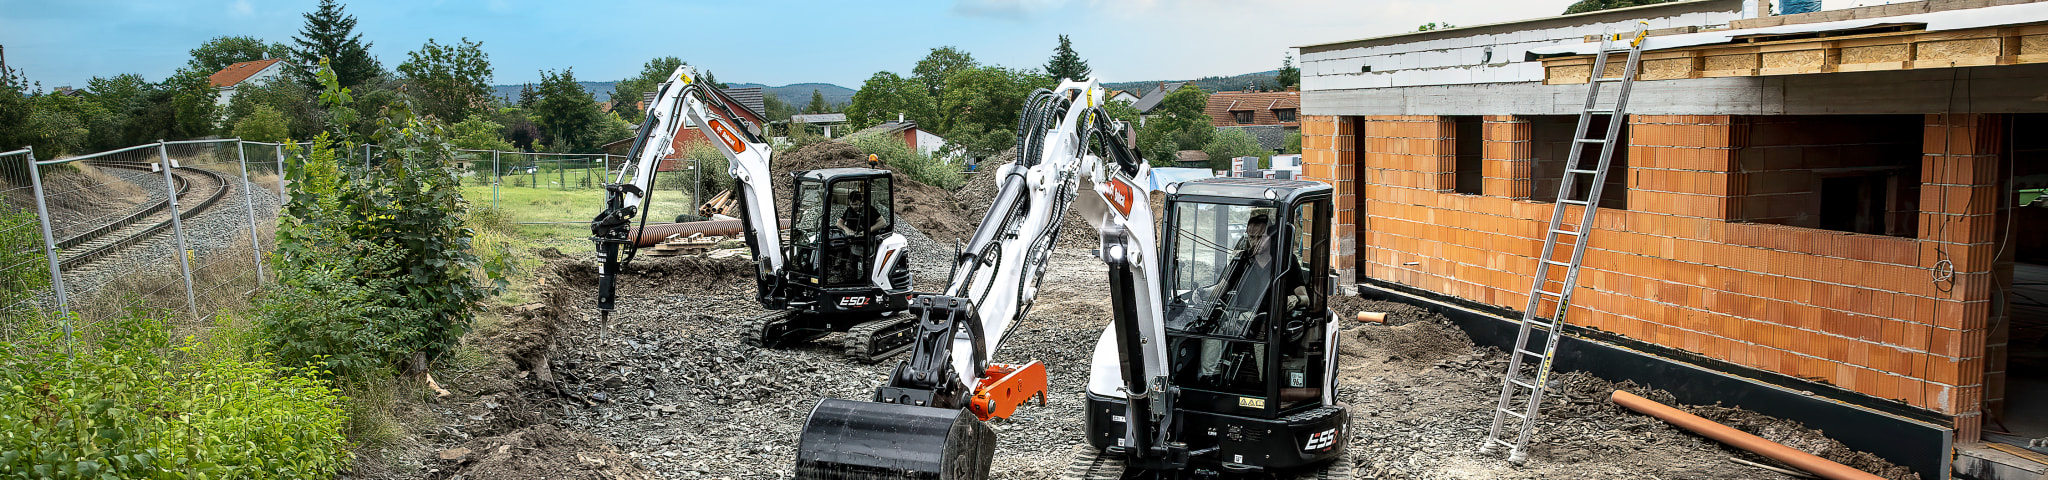 Two male operators in tandem operating two Bobcat mini excavators as they navigate the rubble-strewn terrain of a housing project.